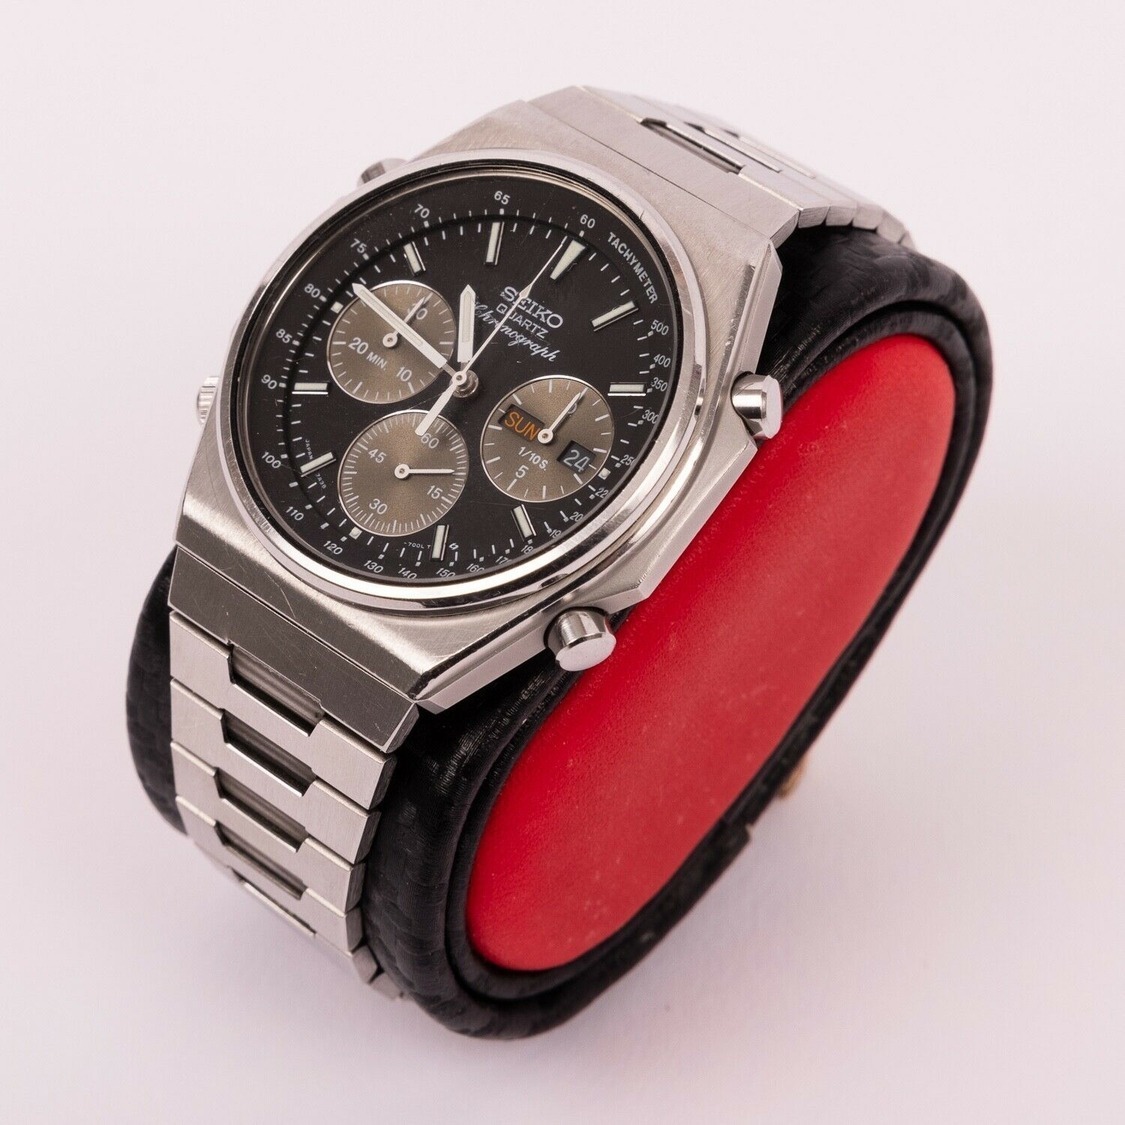 rsz_7a38-7000-stainless-black-ebay-oct2021-andanother-4.jpg